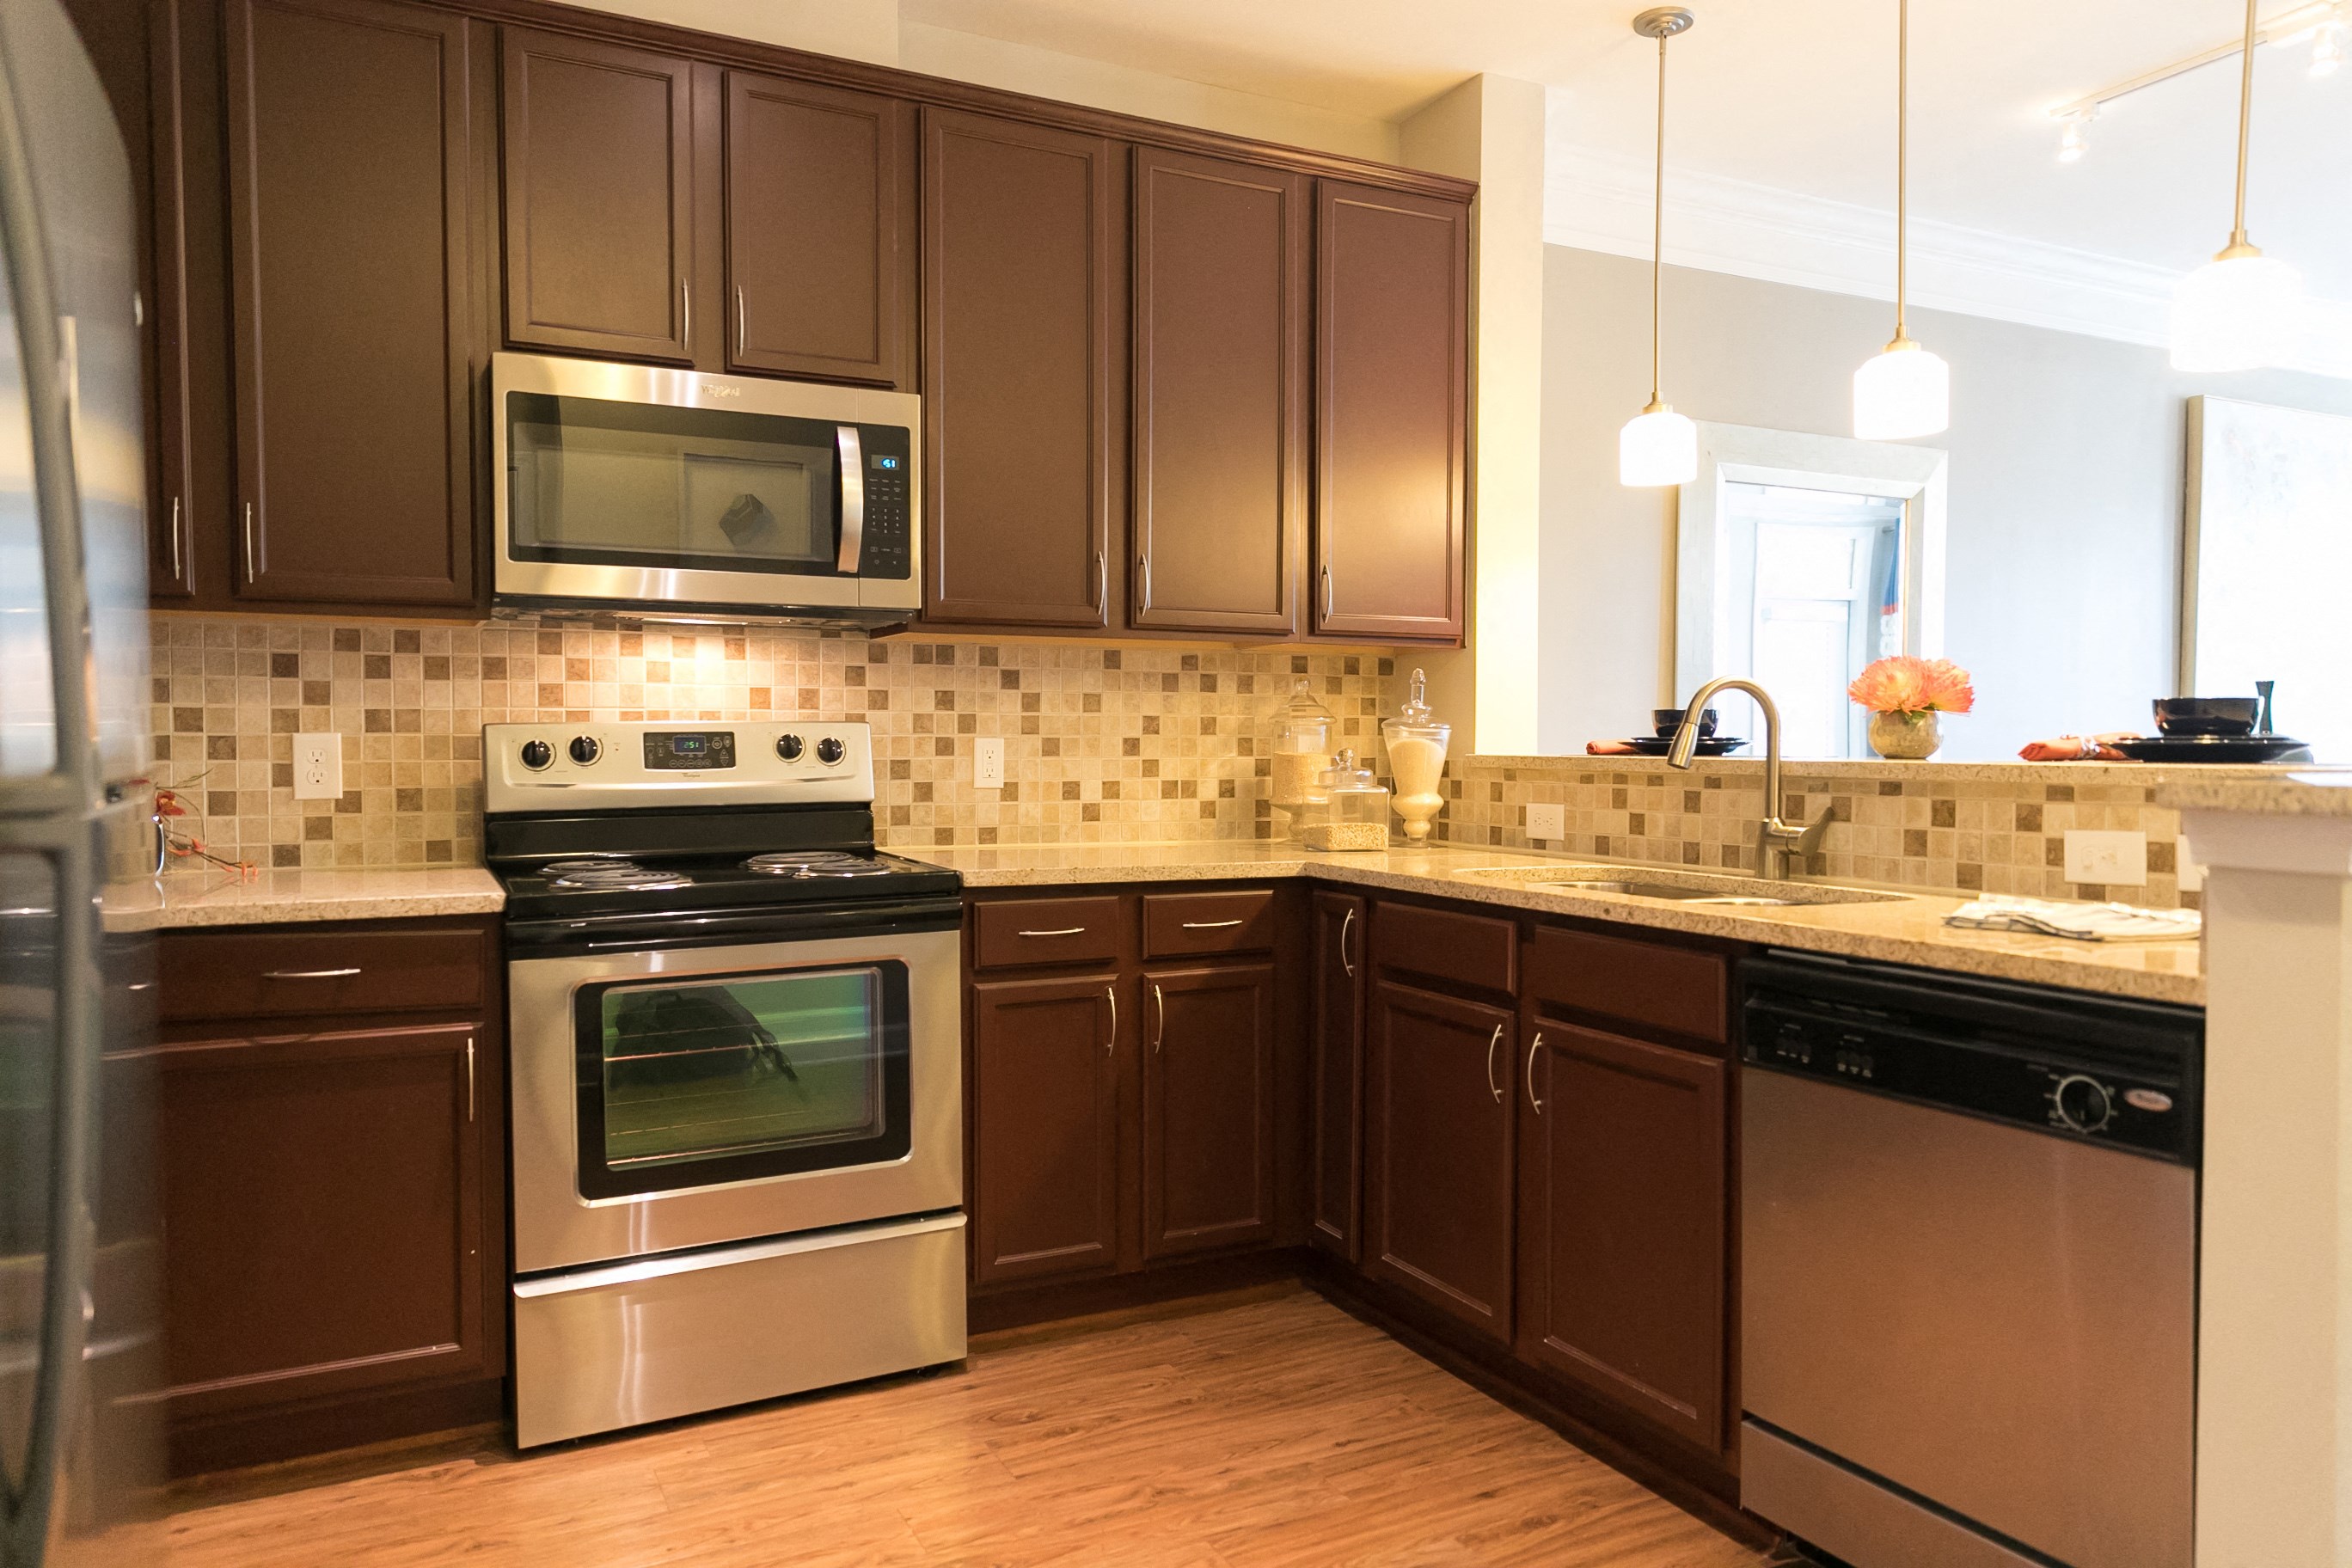 Kitchen area with brown cabinets, stainless steel appliances, tile backsplash, and granite countertops.